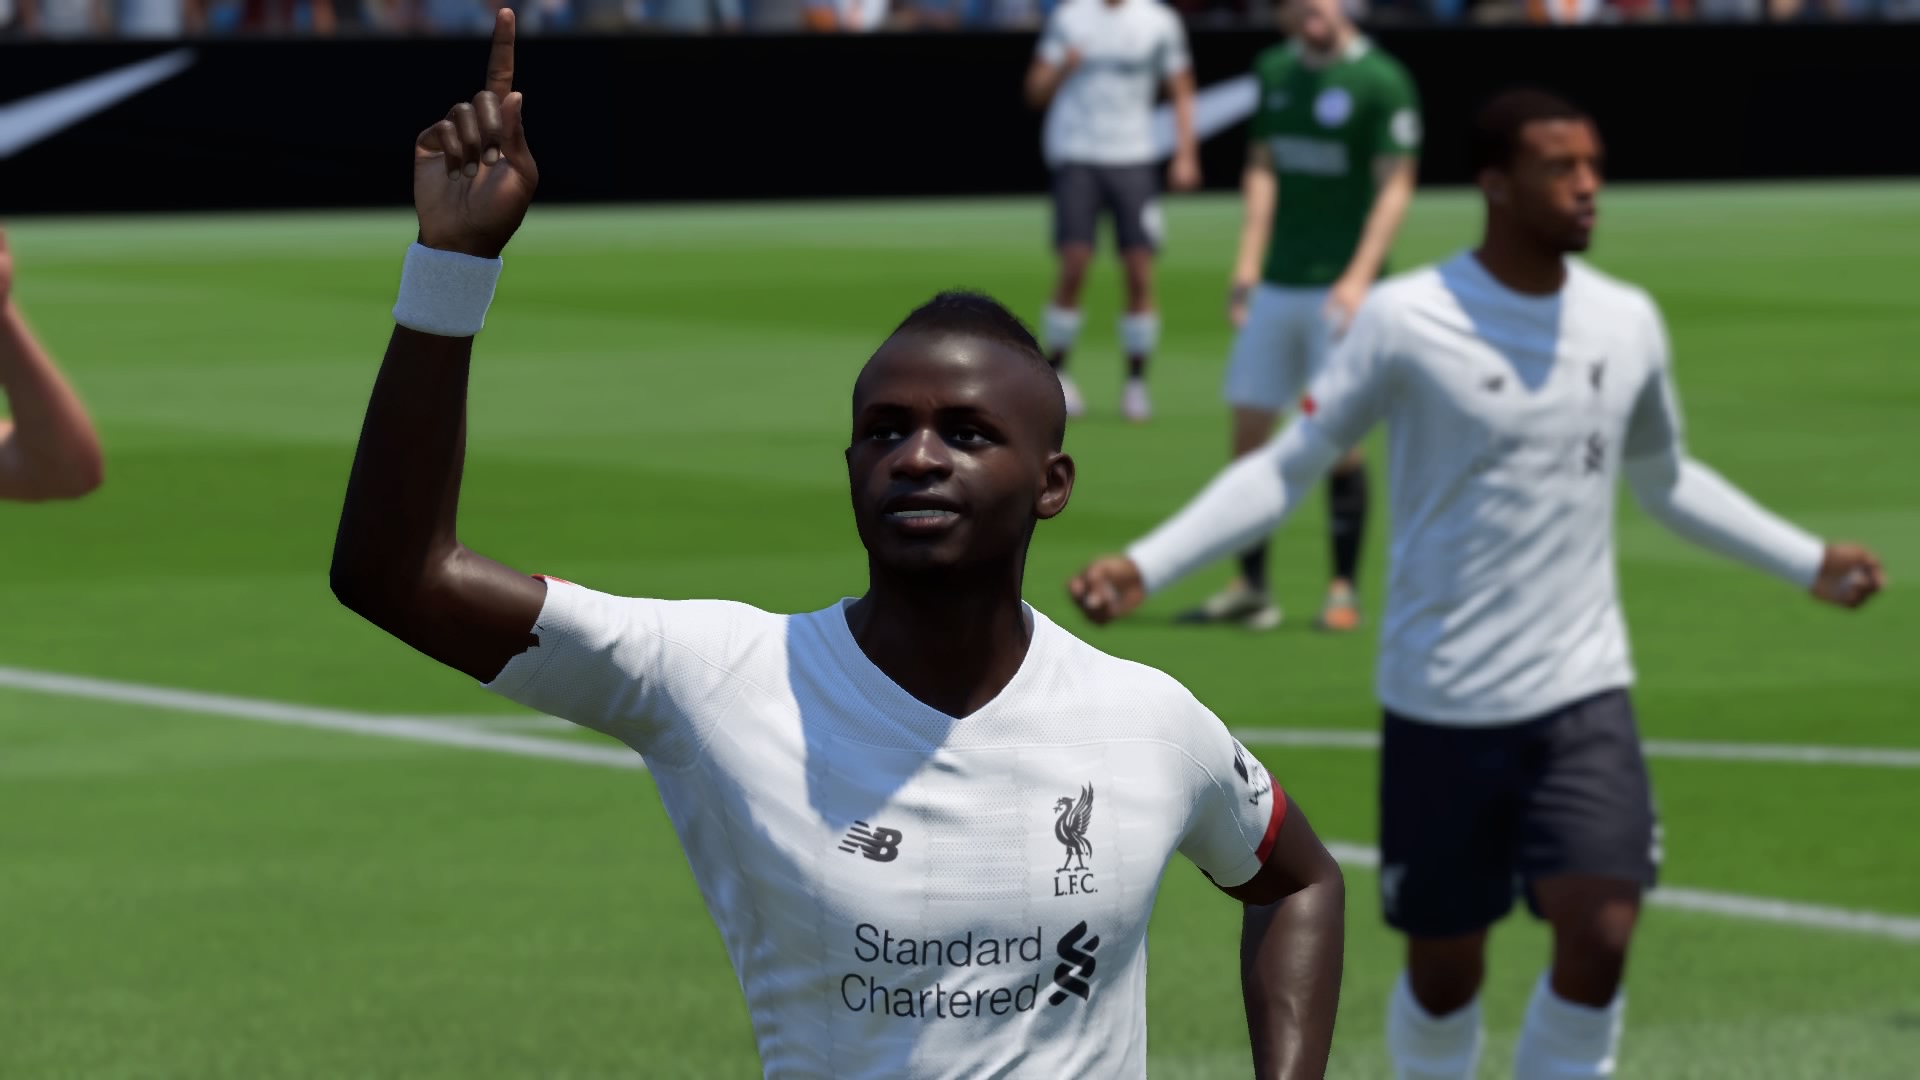 Fifa 20 Fastest Players Adama Troare And Kylian Mbappe Outrace